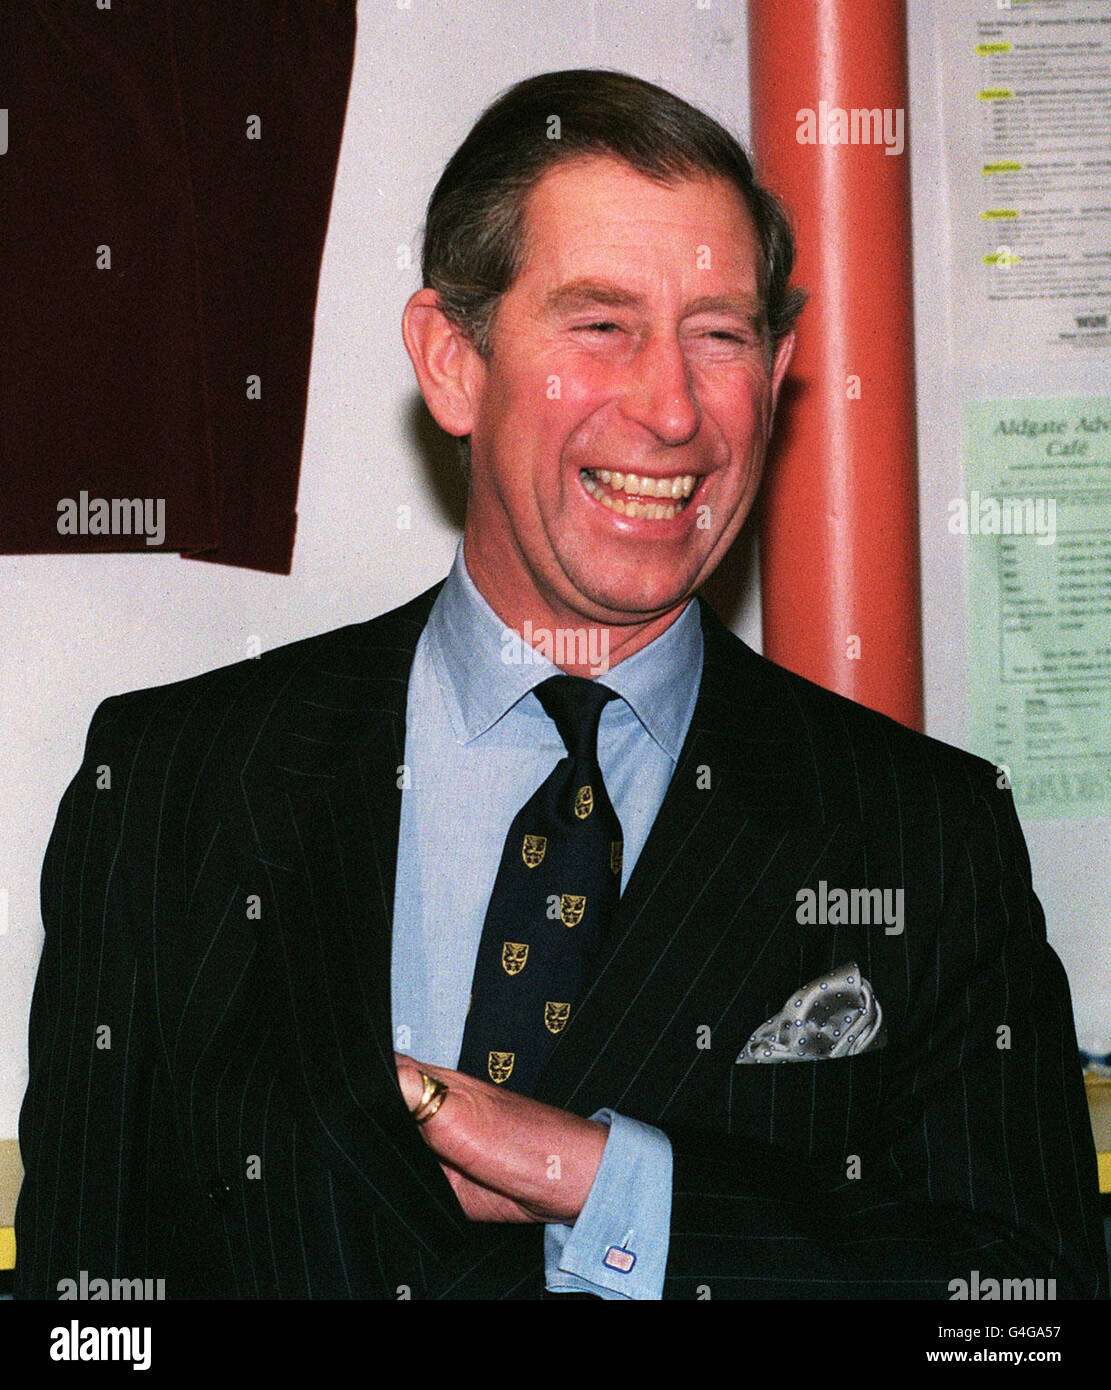 Prince of Wales Big Issue. The Princve of Wales laughs during his 'bloody' speech at the Big Issue offices in London. Stock Photo